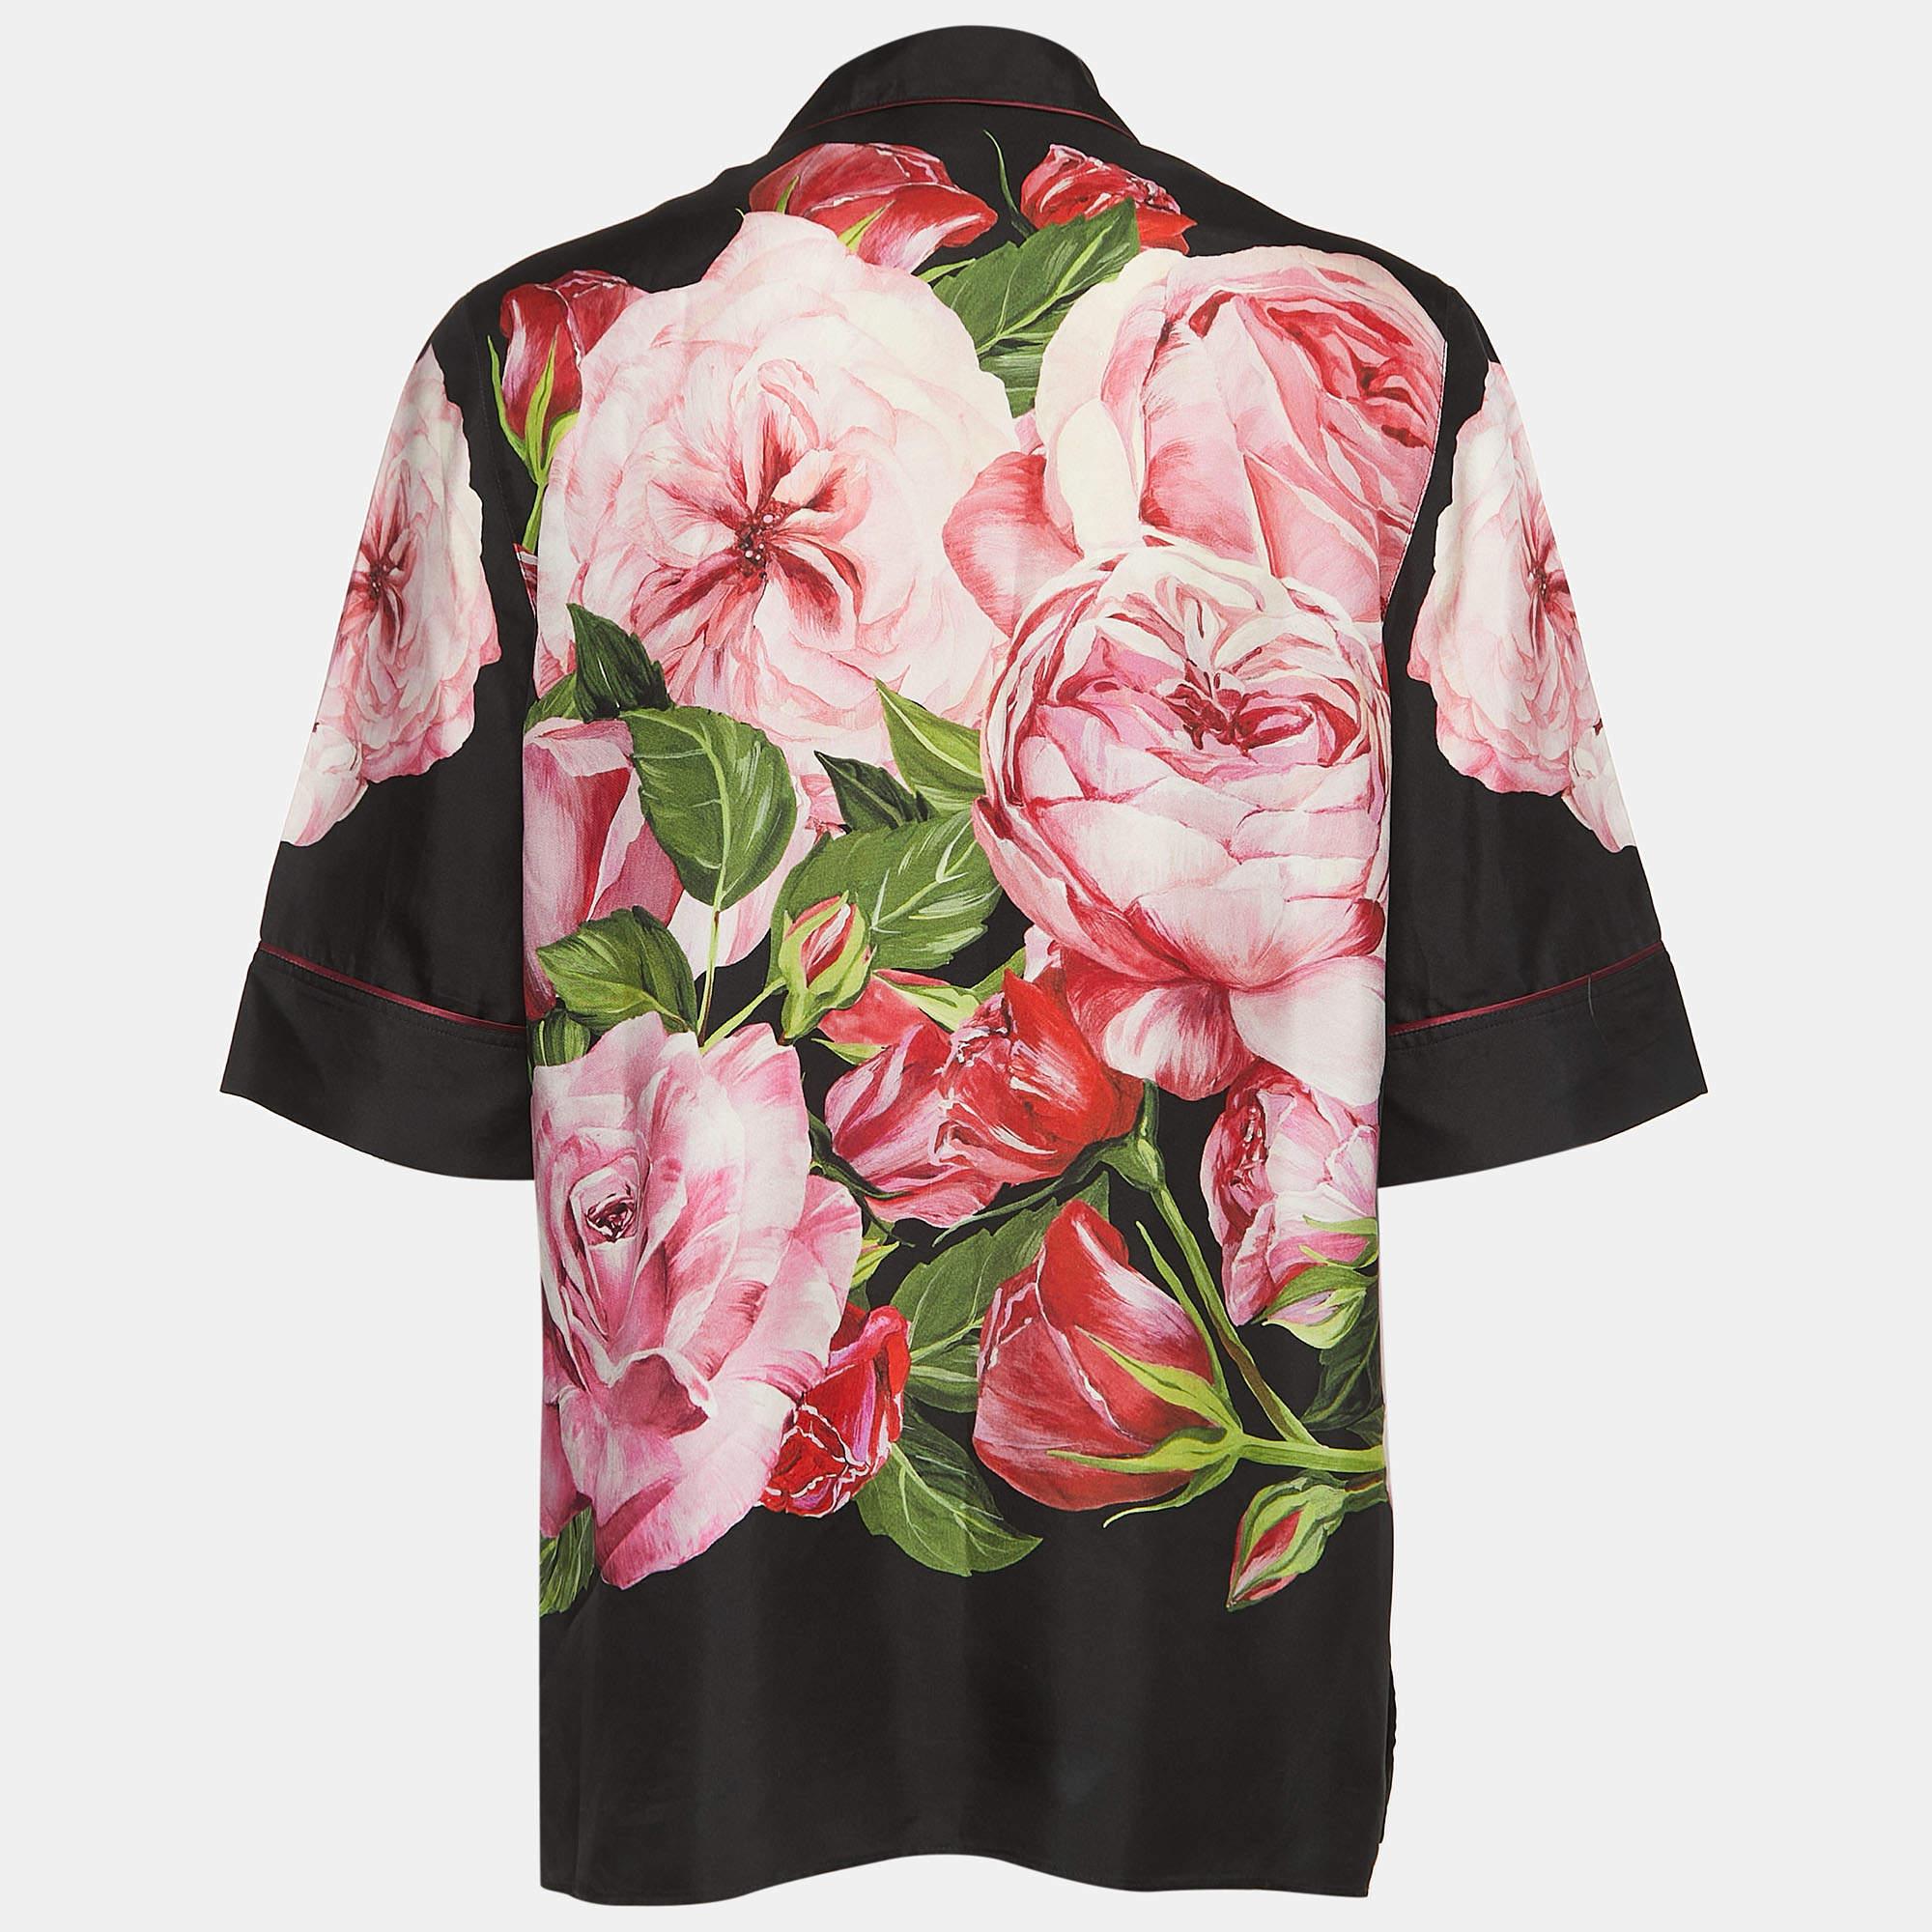 The Dolce & Gabbana pajama top exudes luxury with its sumptuous silk fabric and intricate floral design. The black base enhances the vibrant blossoms, creating a sophisticated yet playful aesthetic. Perfect for lounging or making a statement in